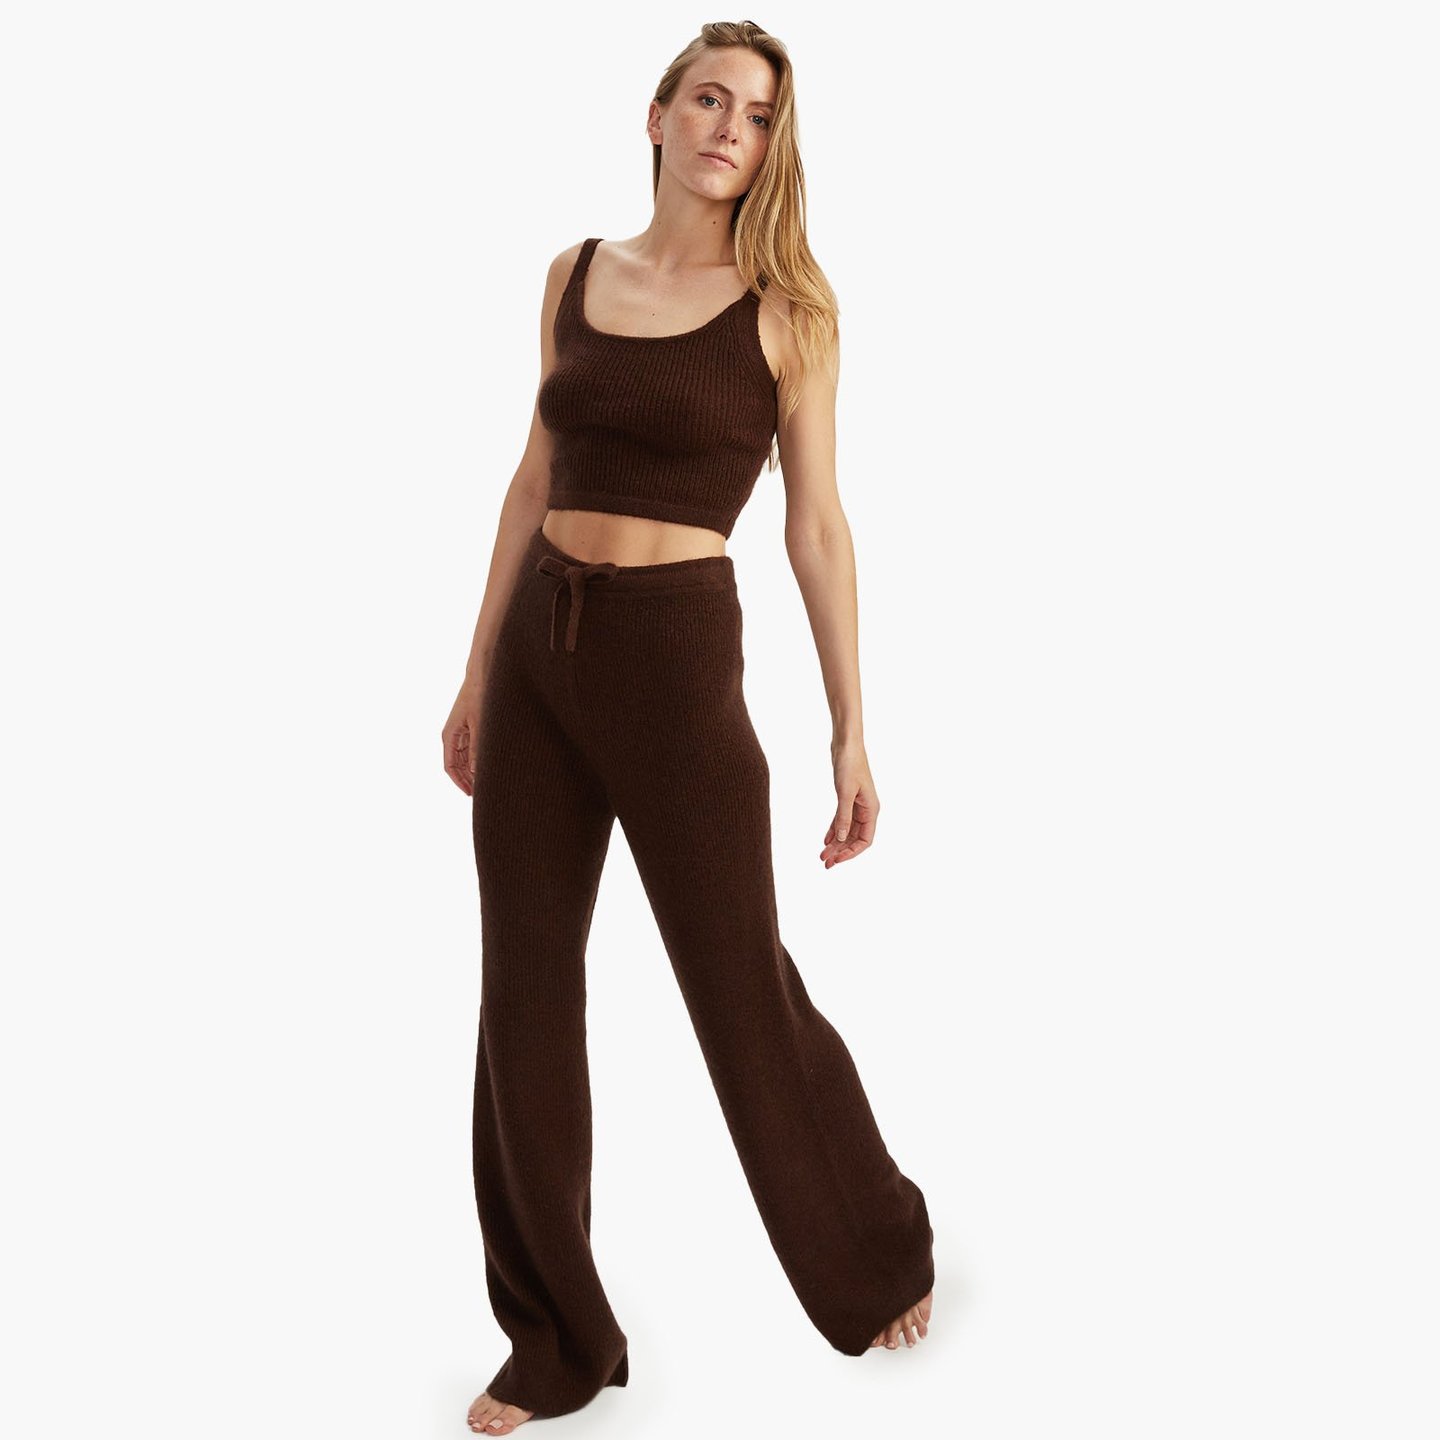 NWEP001444_Luxe_Merino_Cashmere_Wide_Leg_Pant_Cacao_003_1440x.jpg